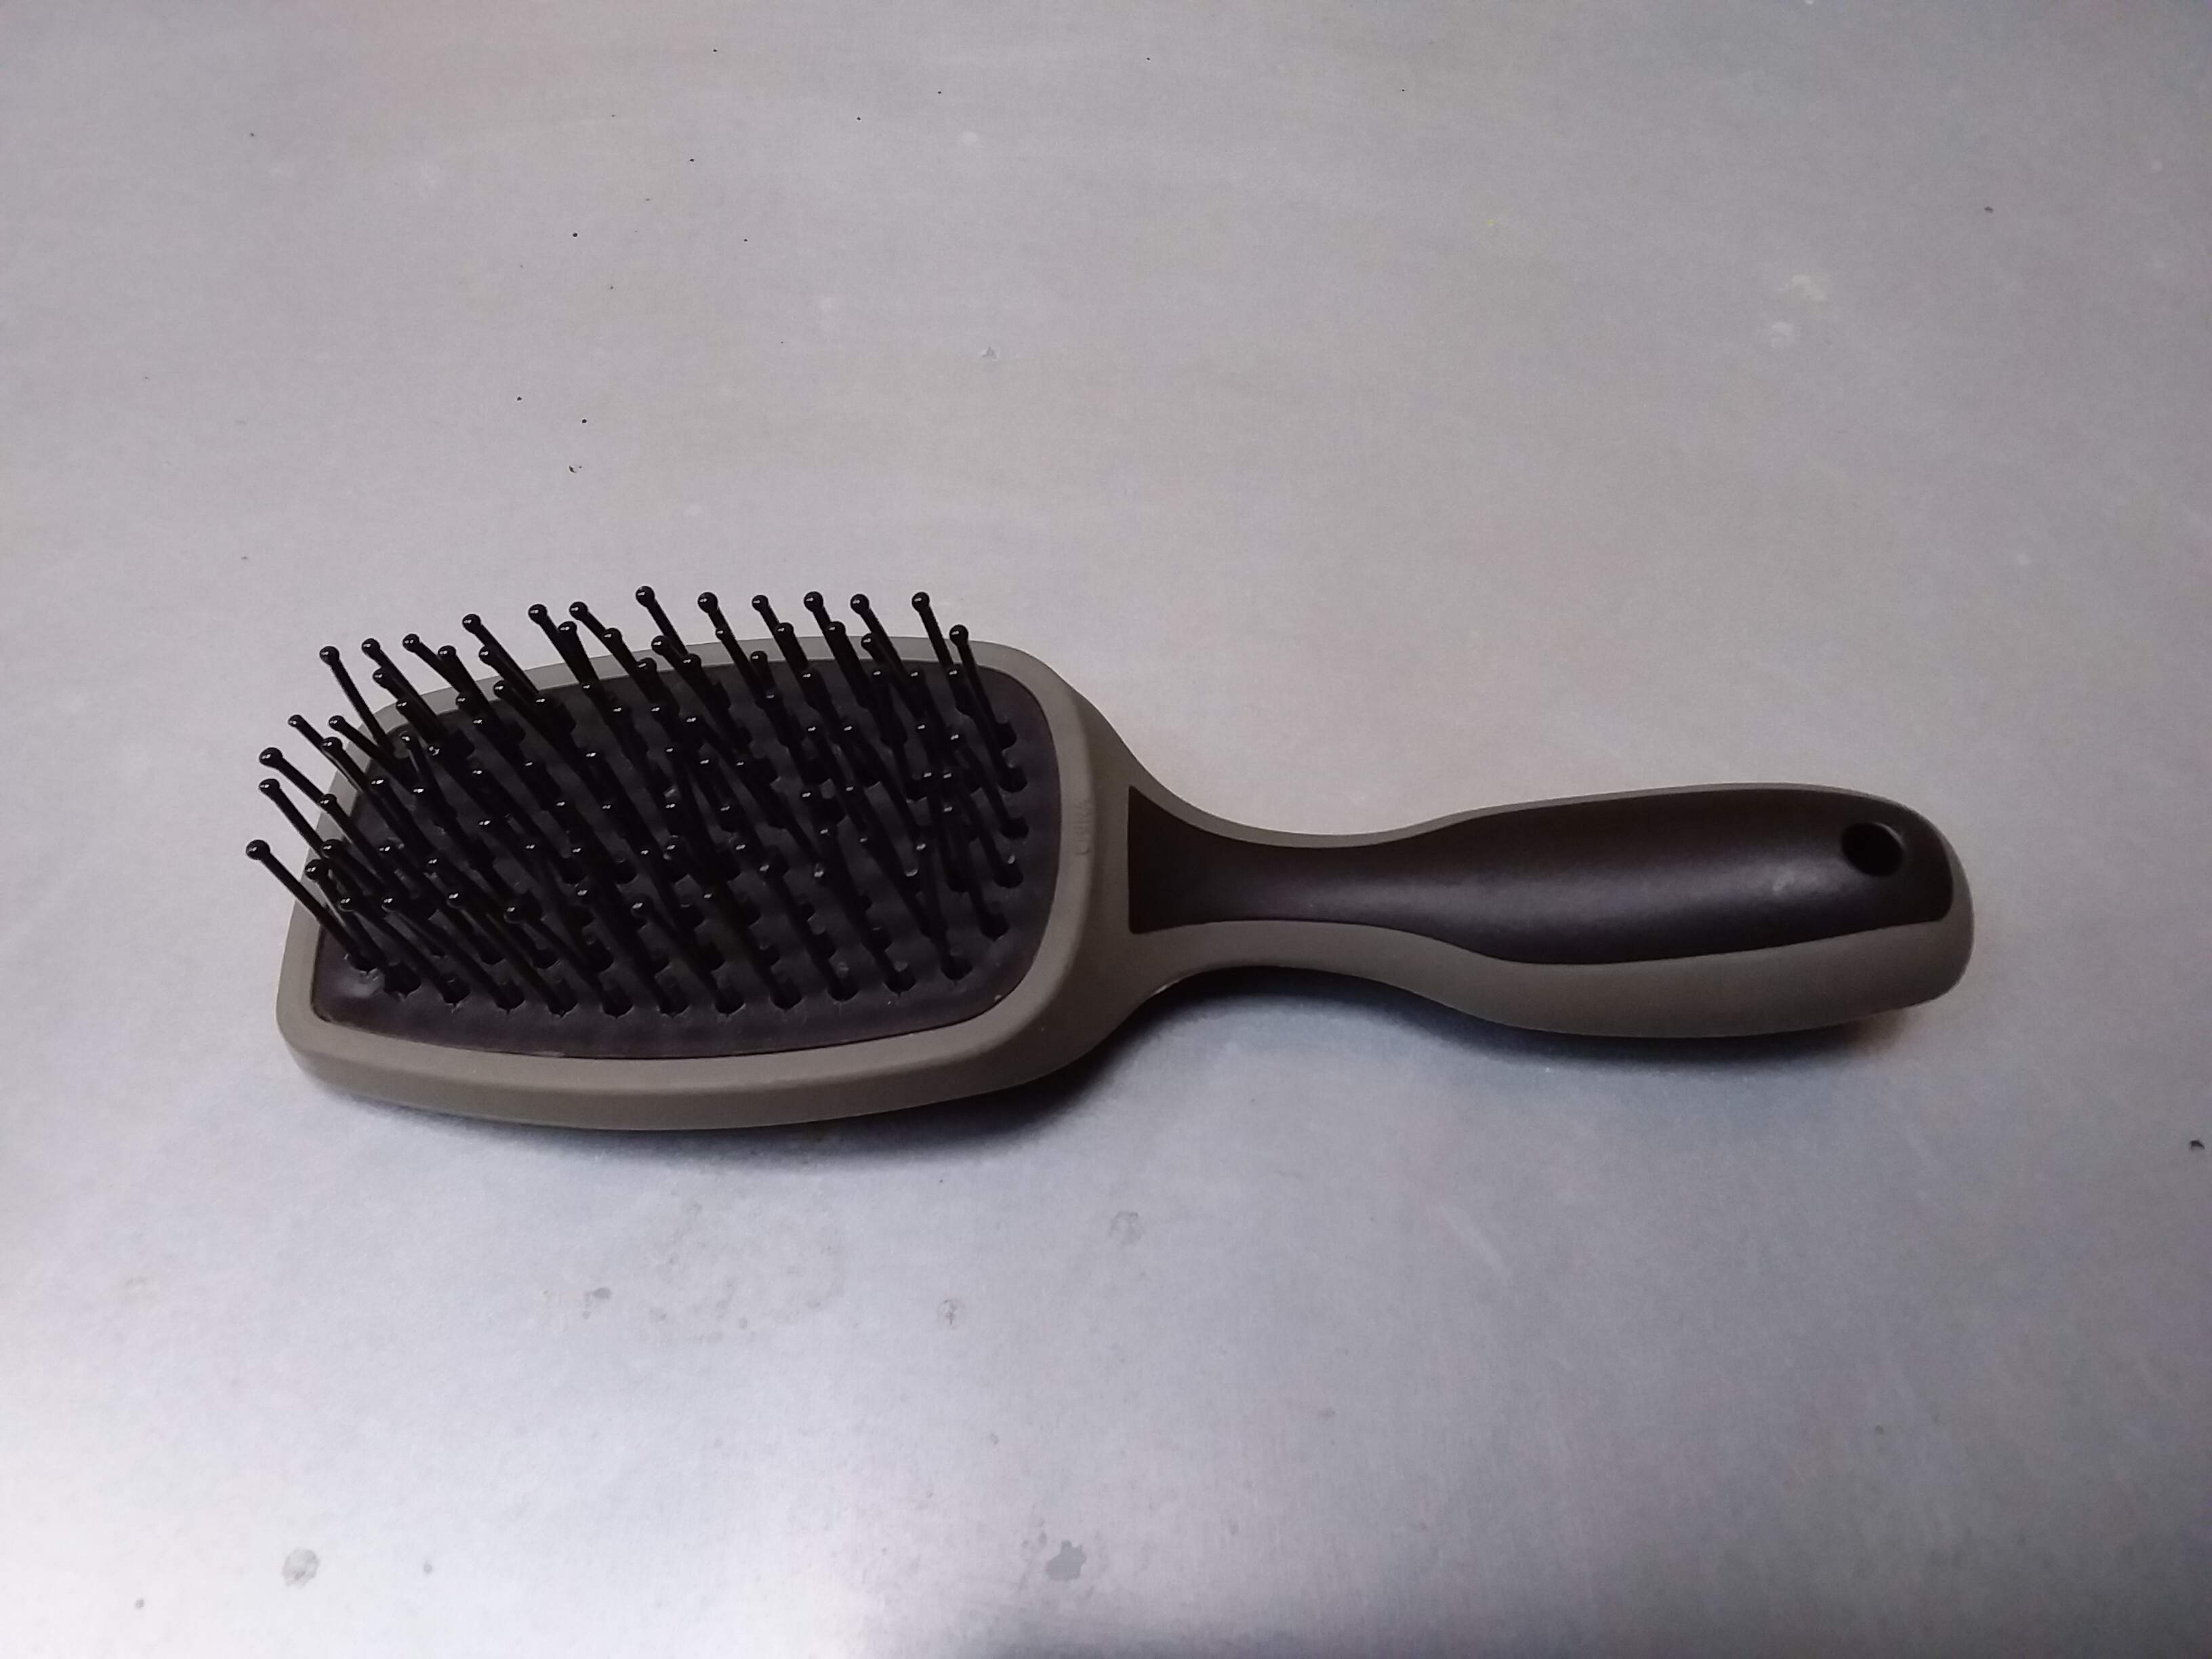 Wahl Mane and Tail Brush